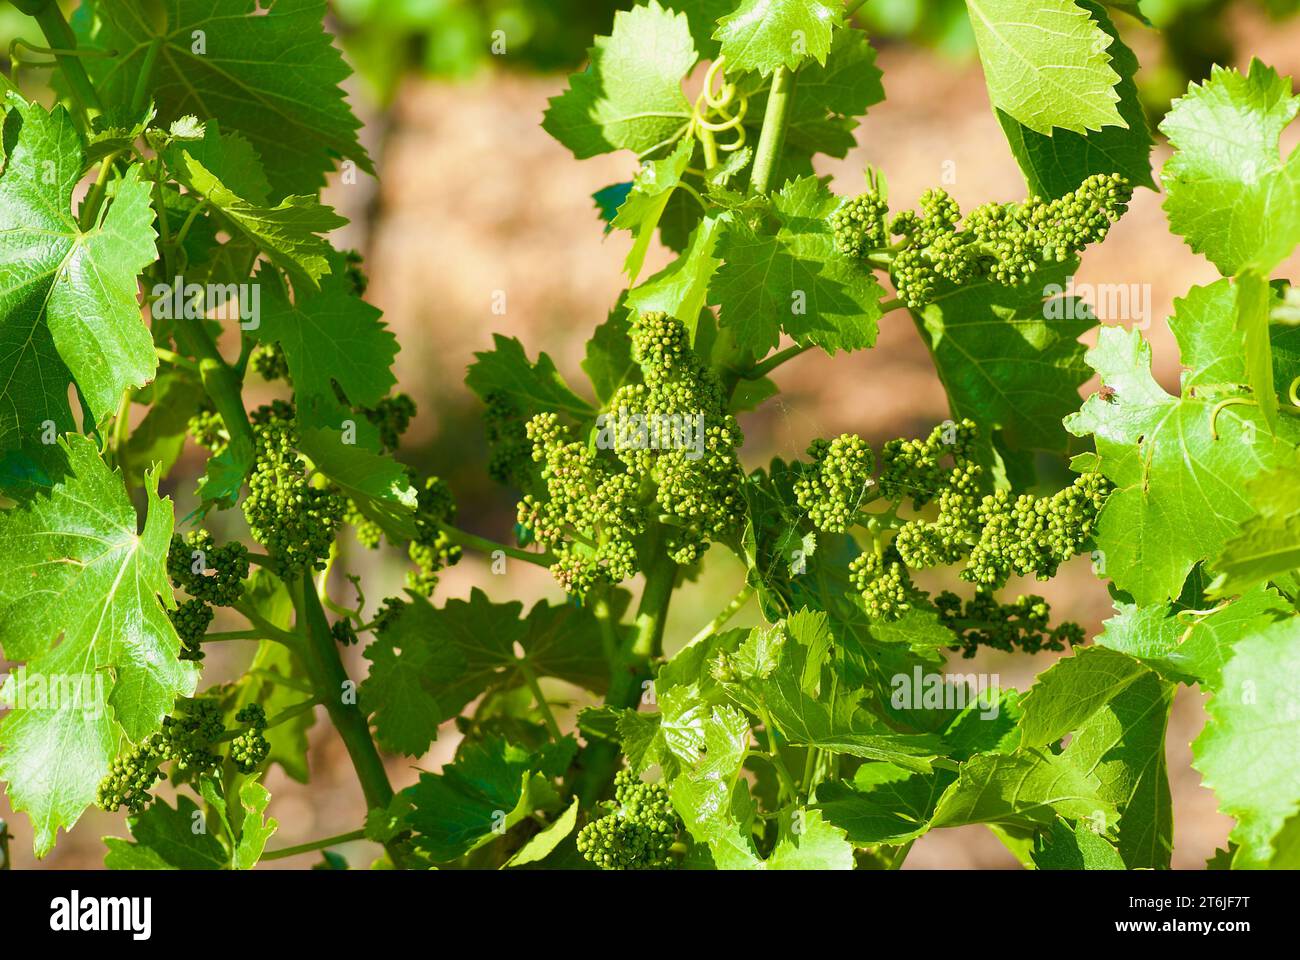 Vine plant with fresh green leaves and bunches of small unripe berries on a vineyard in summer in France. Stock Photo